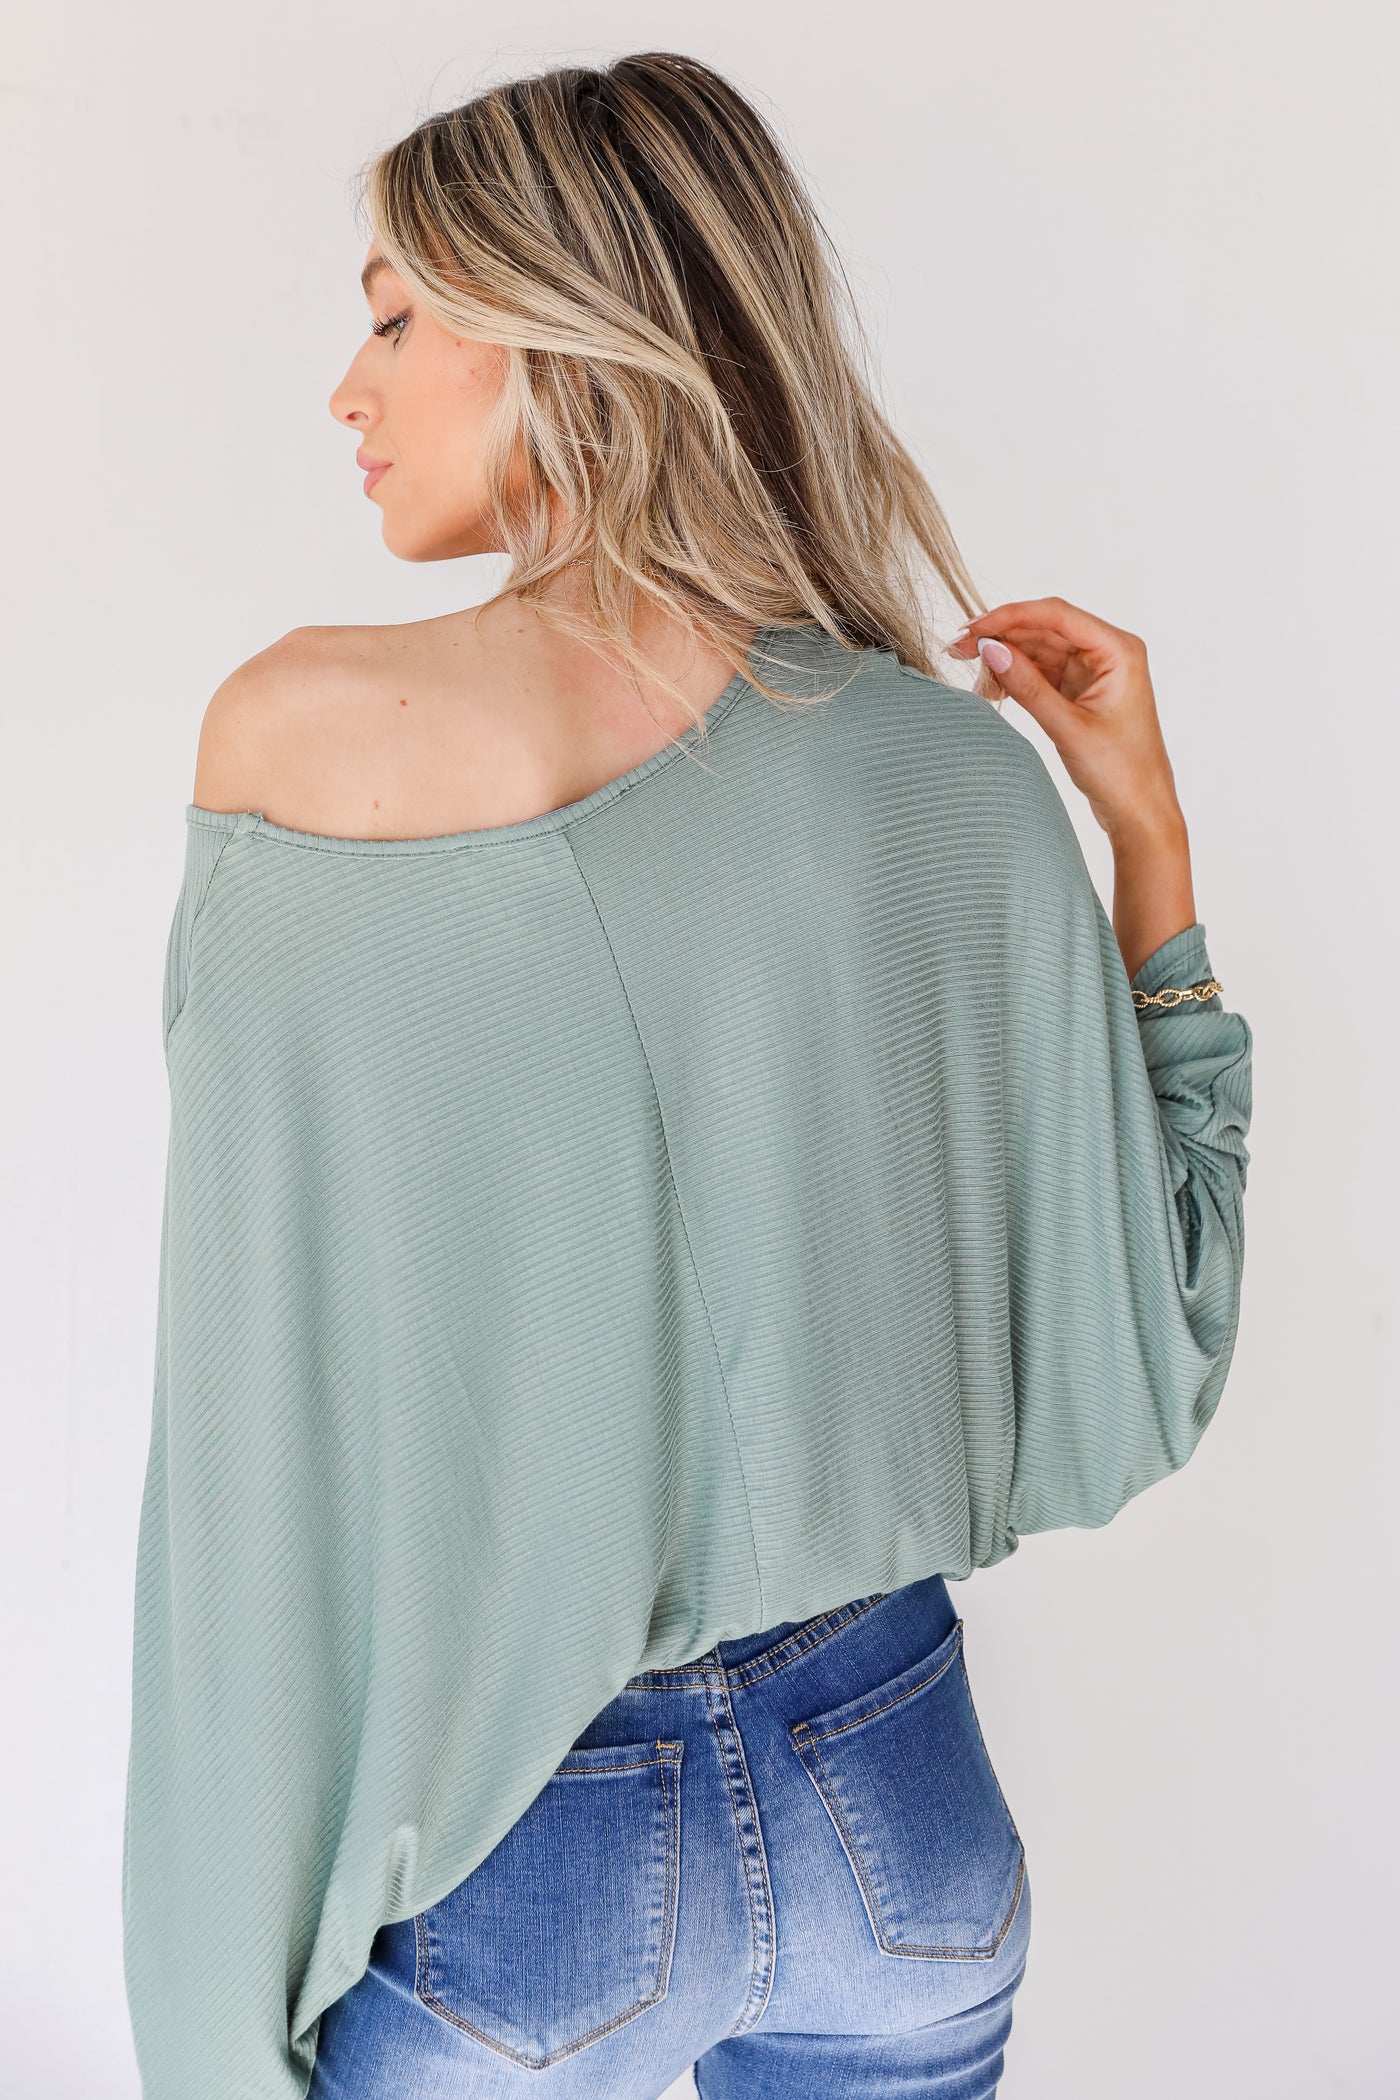 Ribbed Top in sage back view